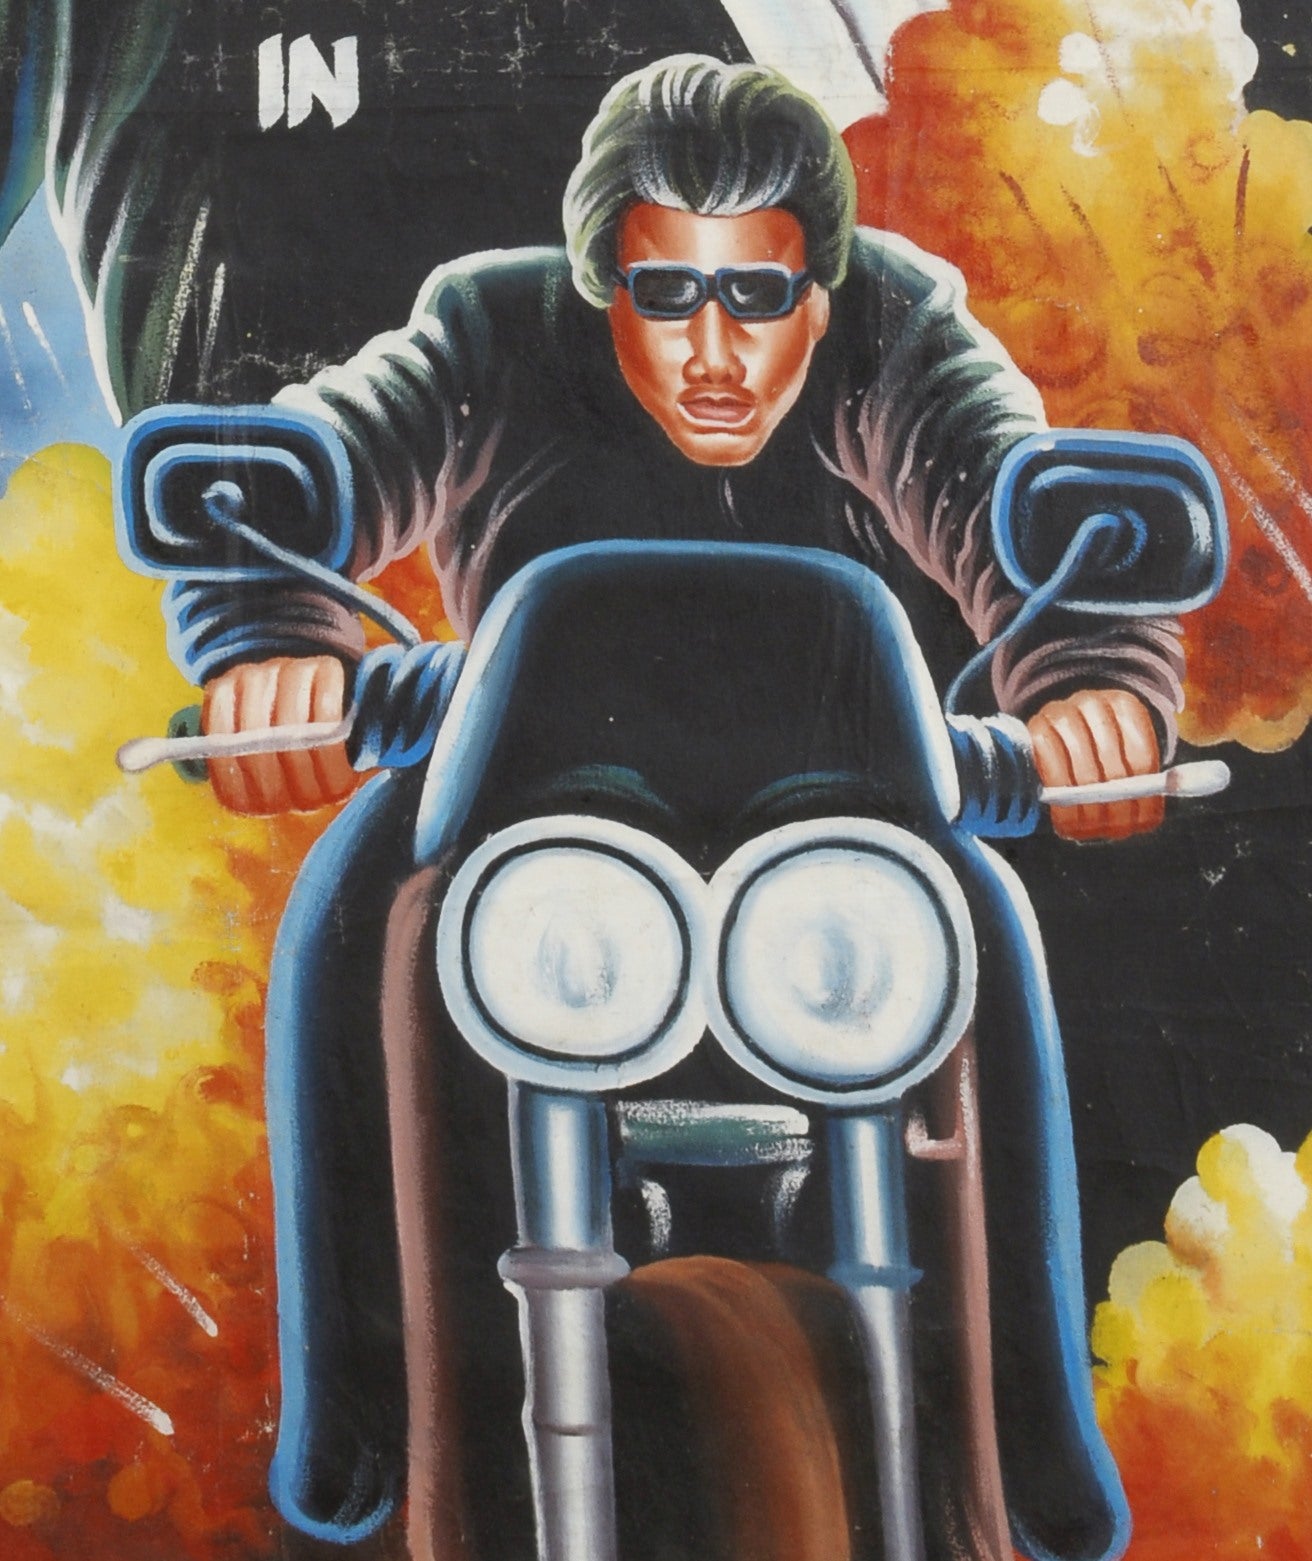 MISSION IMPOSSIBLE MOVIE POSTER HAND PAINTED IN GHANA FOR THE LOCAL CINEMA MORE DETAILS